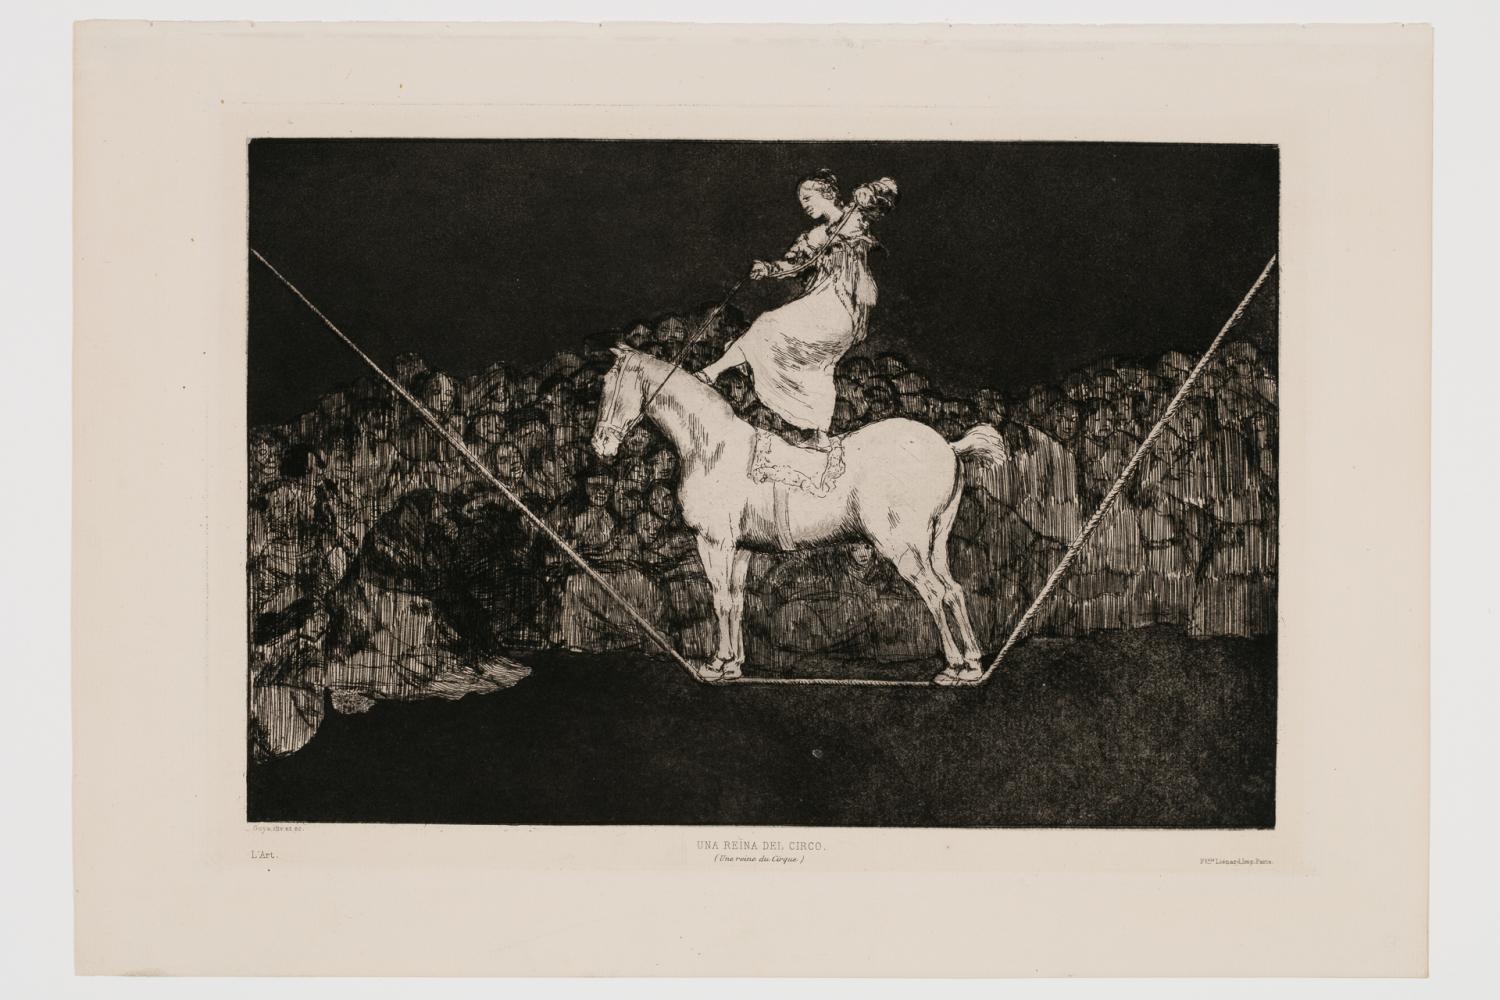 A black and white print of a woman balancing precariously atop a horse, which is balancing precariously atop a tightrope in front of an audience.